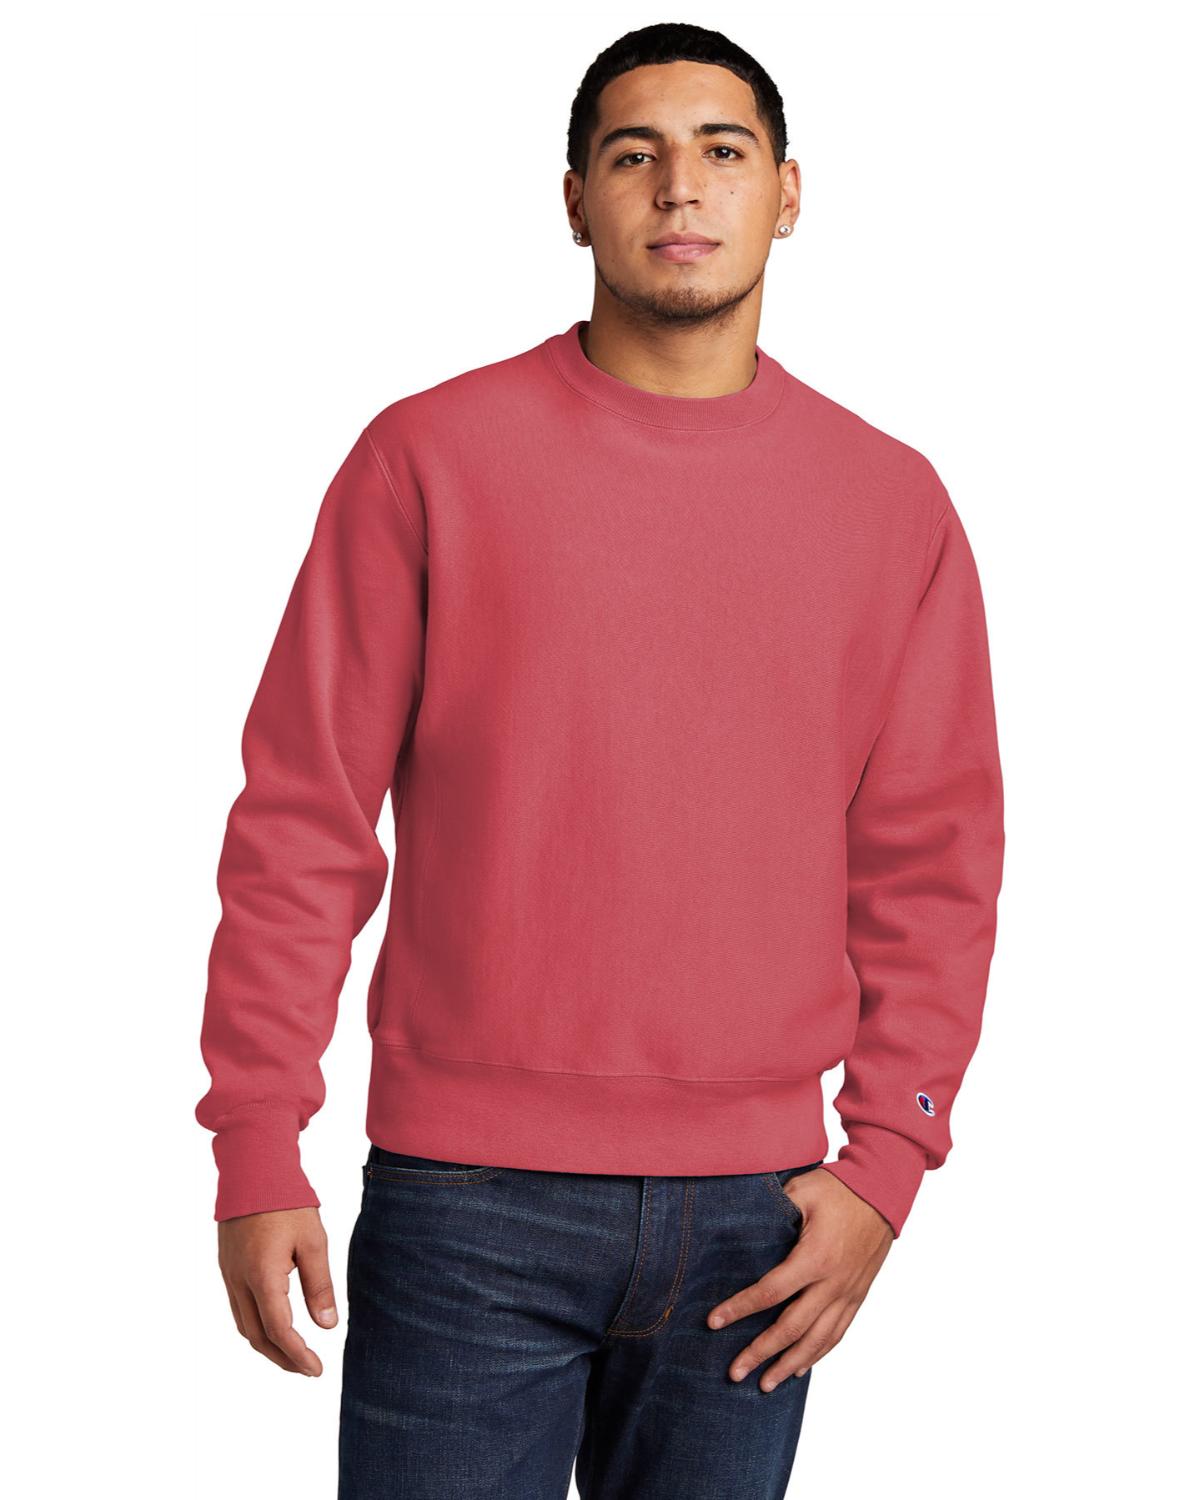 Size Chart for Champion GDS149 Reverse Weave Garment-Dyed Crewneck ...